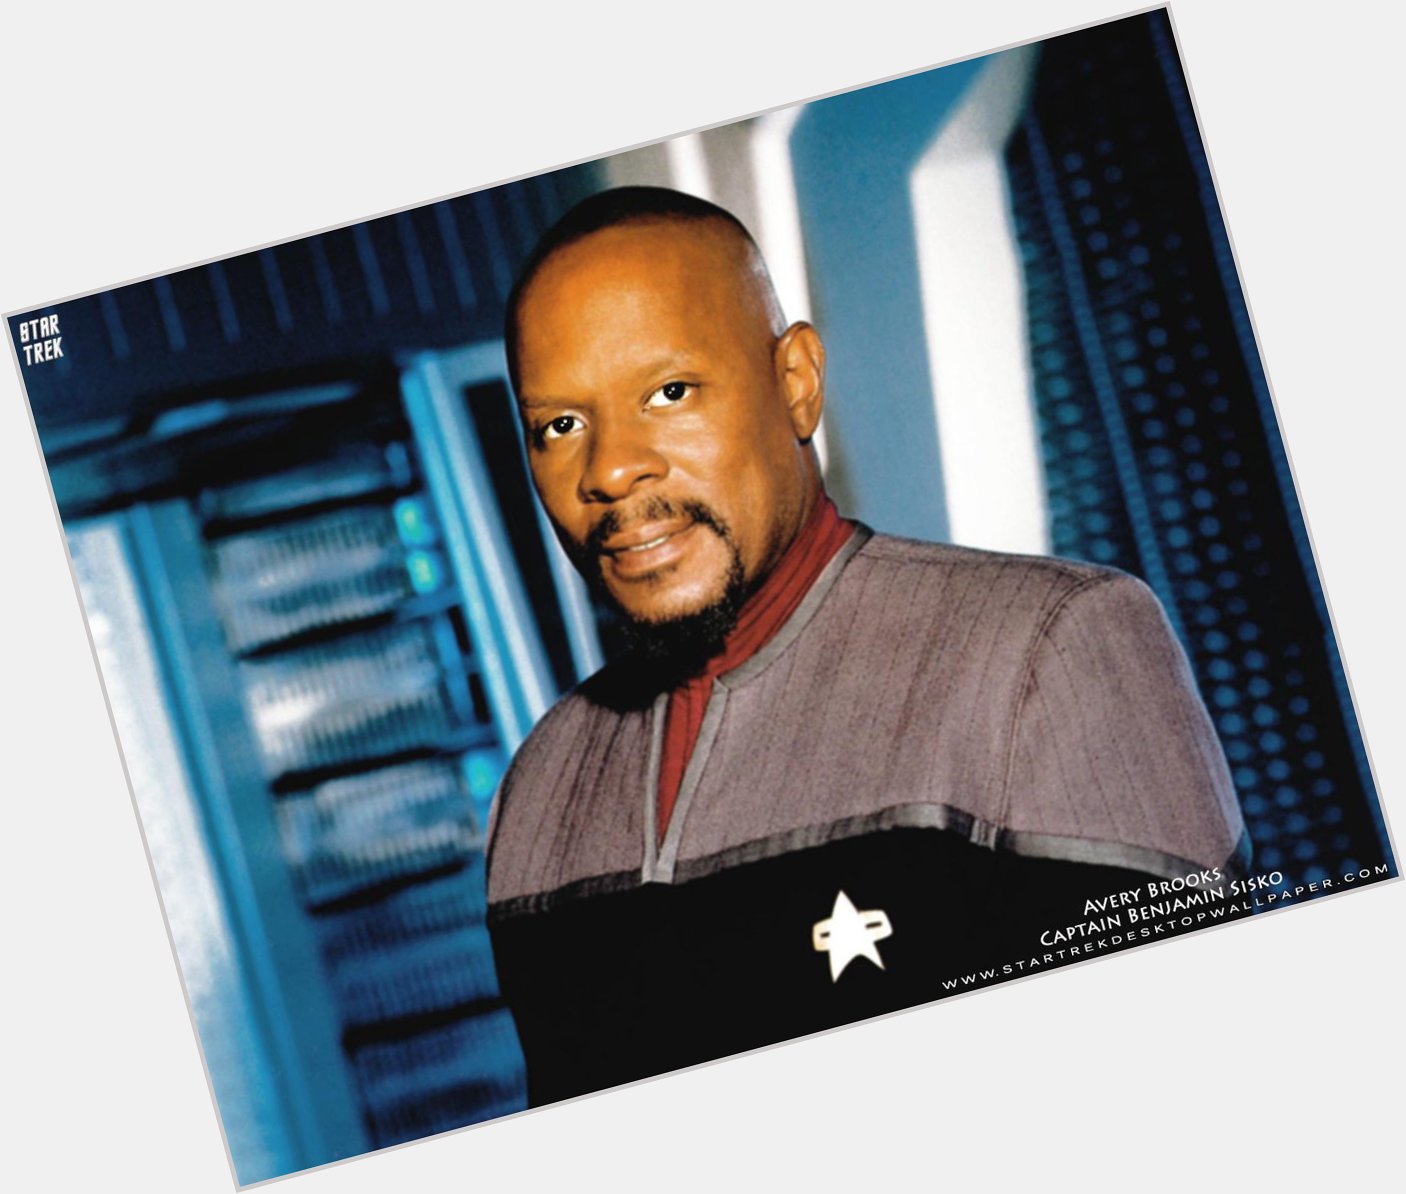 HAPPY BIRTHDAY TO CAPTAIN SISKO-Star Trek\s Avery Brooks.I remember him when he was Hawk in Spencer for Hire. 